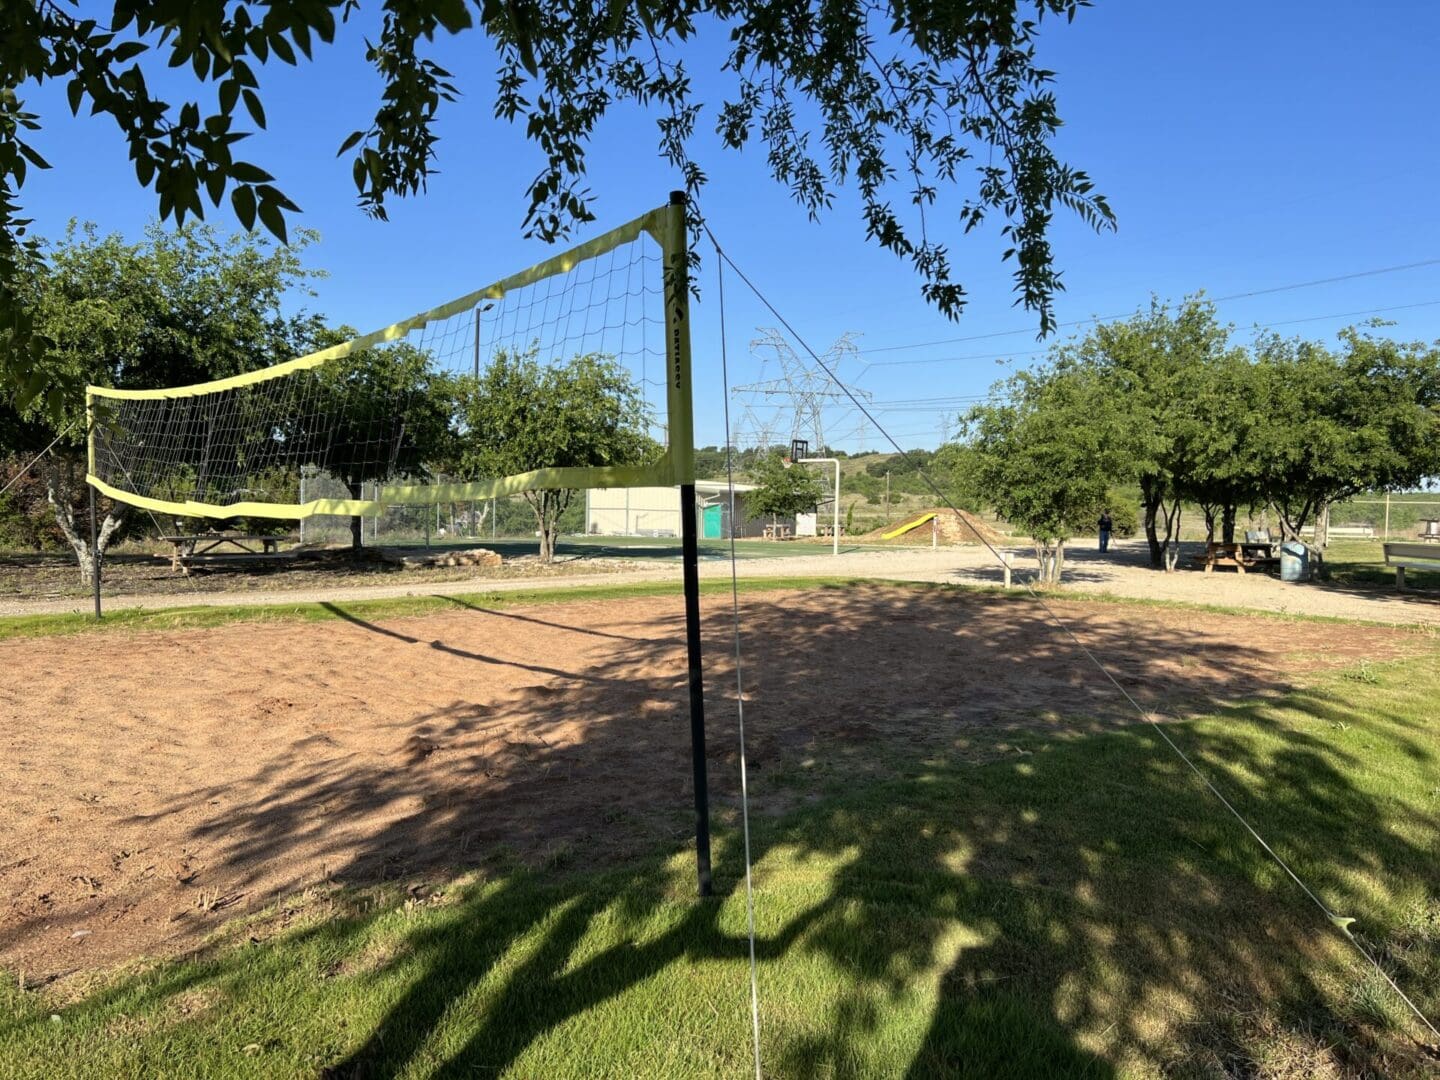 Side view of the sand volley ball court